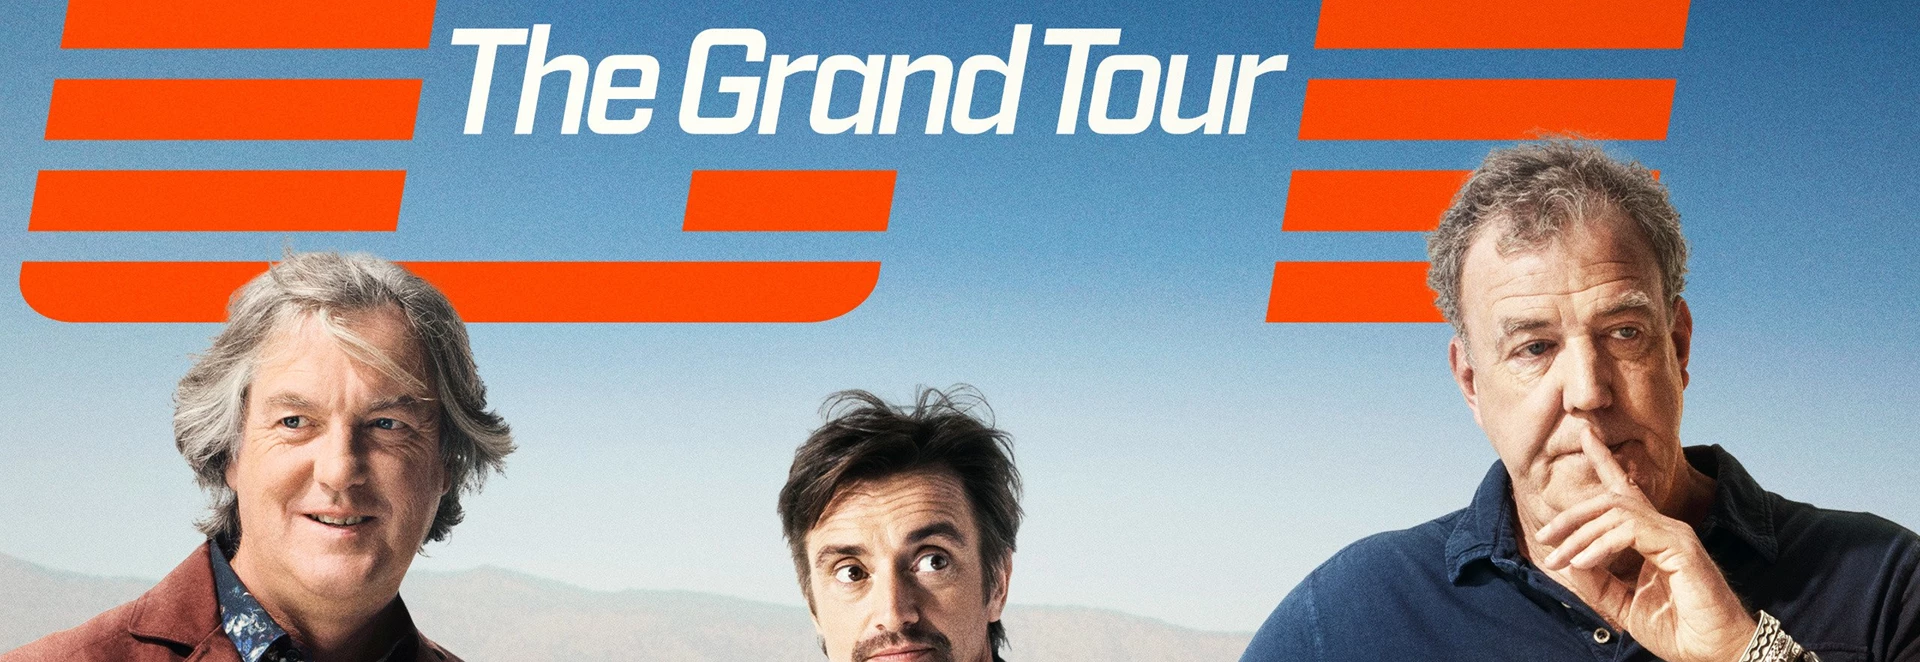 Check out the first full trailer for The Grand Tour 